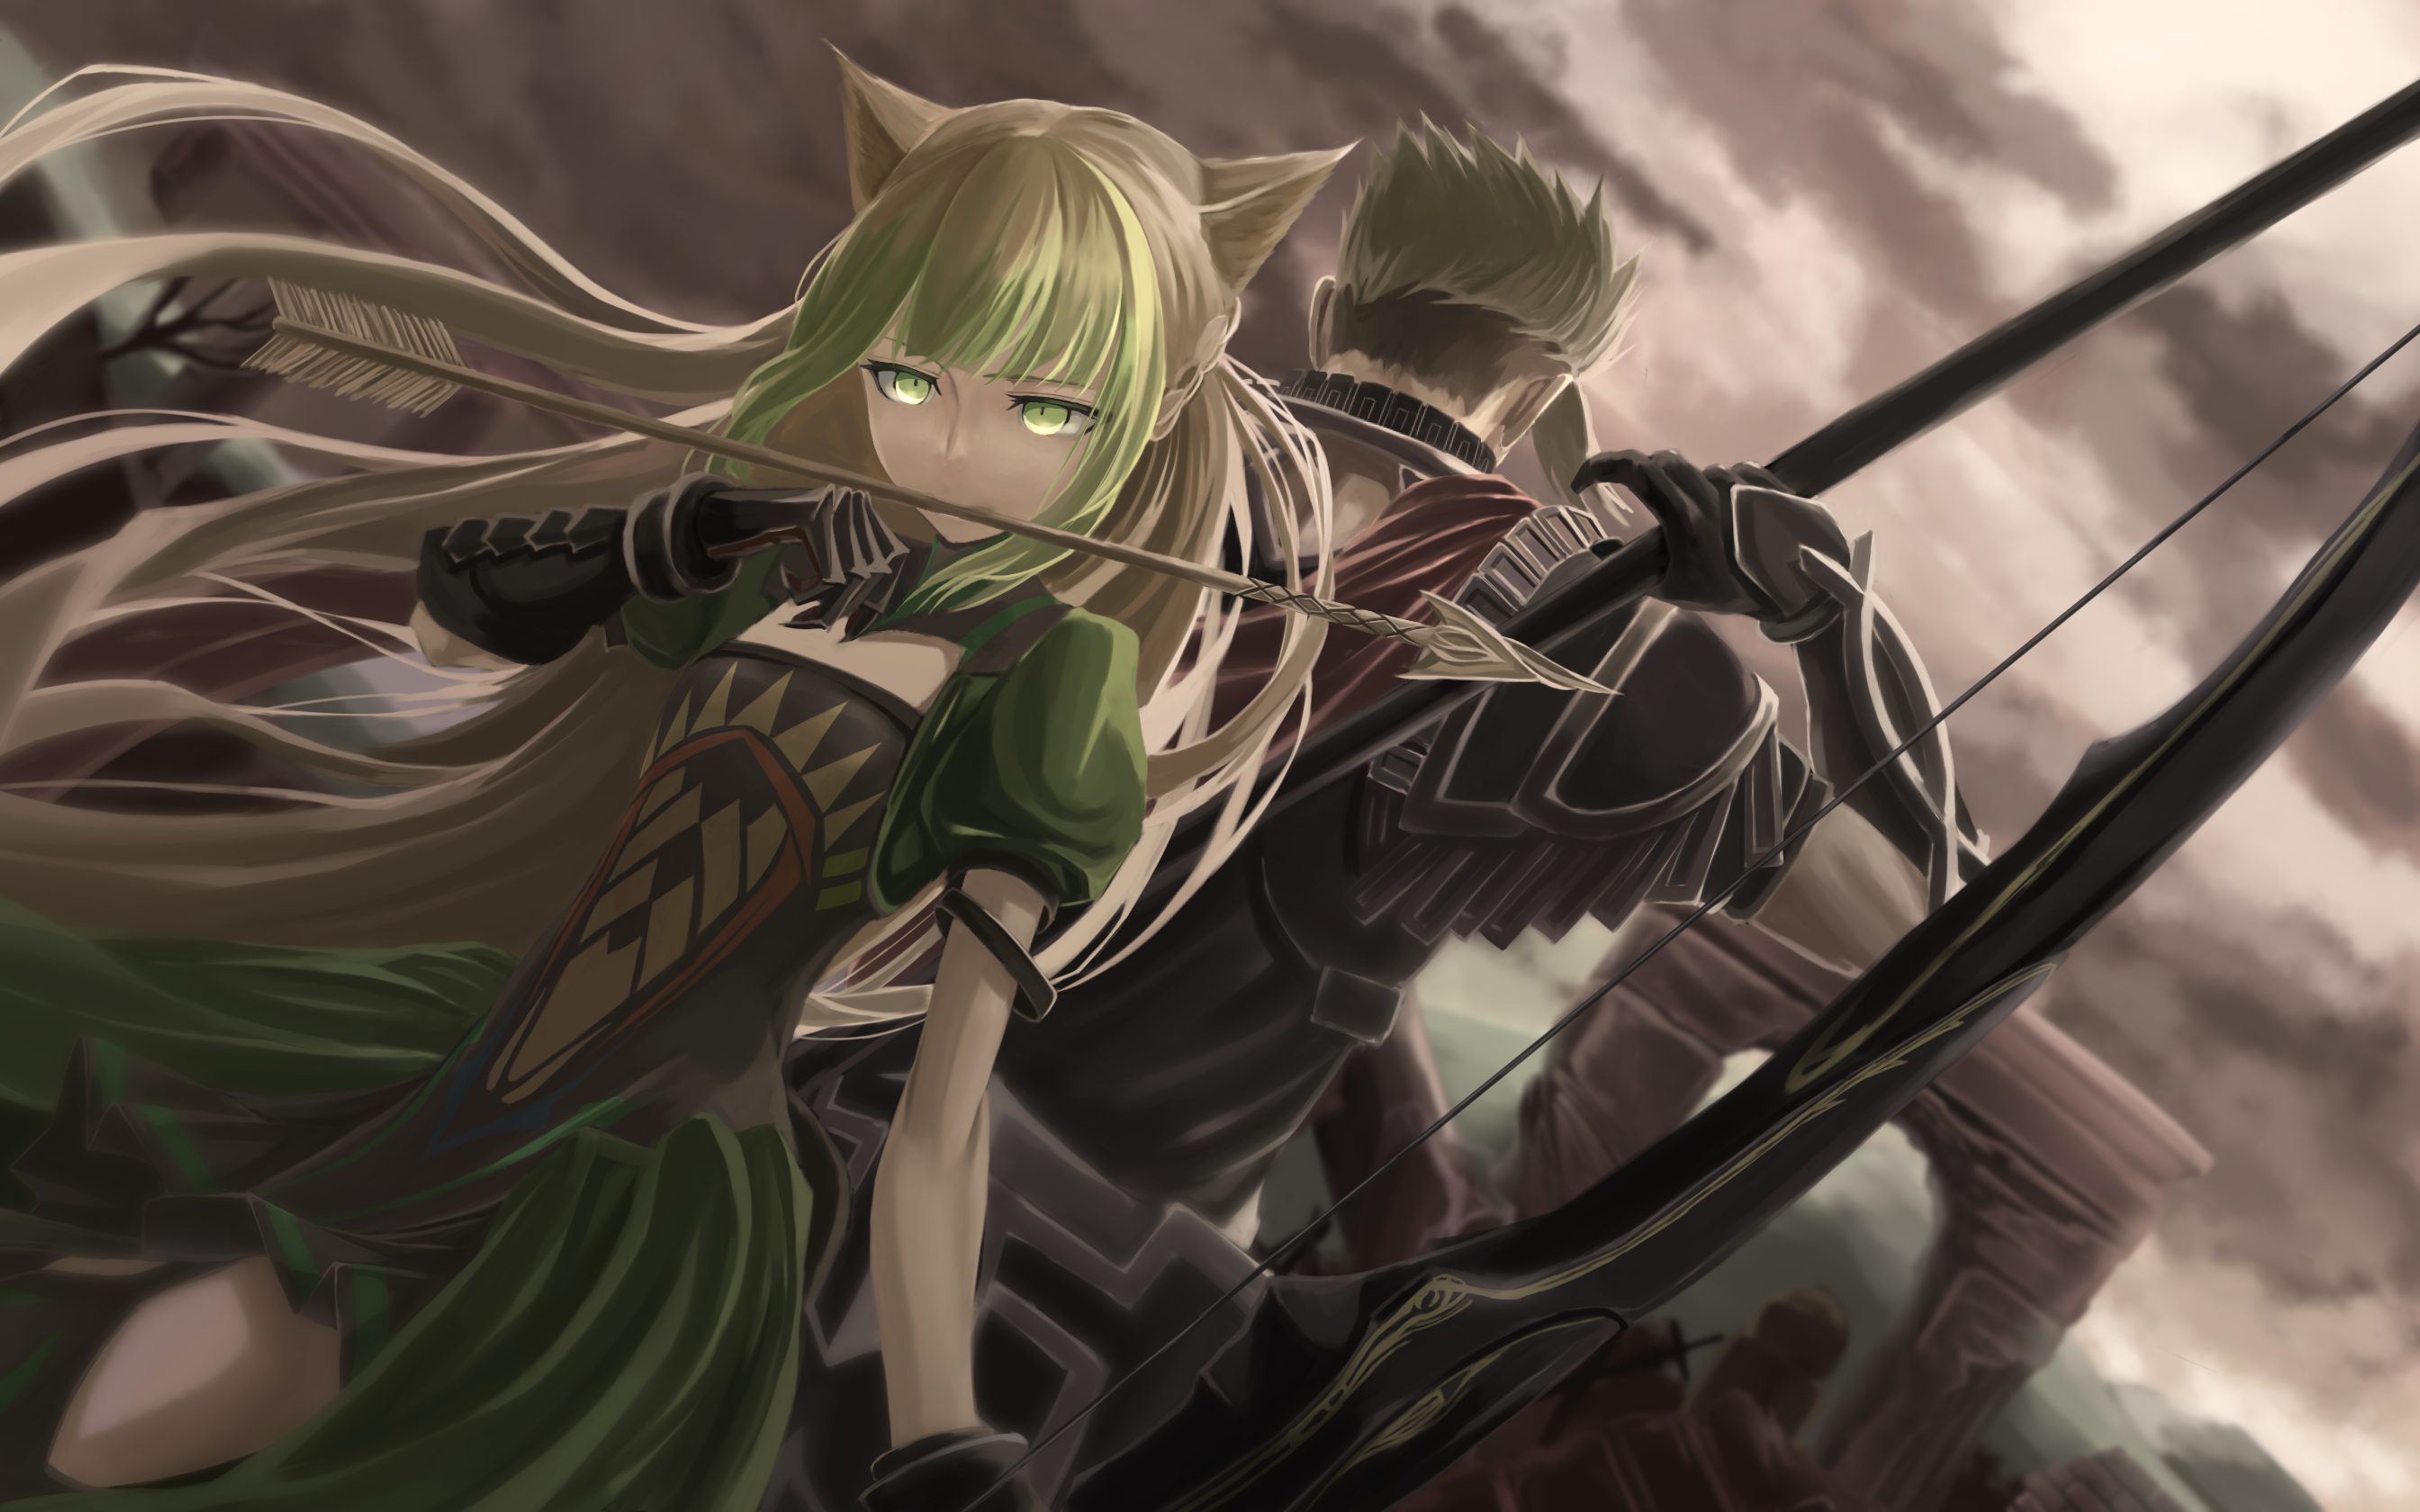 Achilles Fate Apocrypha Archer Of Red Fate Apocrypha Atalanta Fate Apocrypha Rider Of Red Fate Apocr 2688x1680